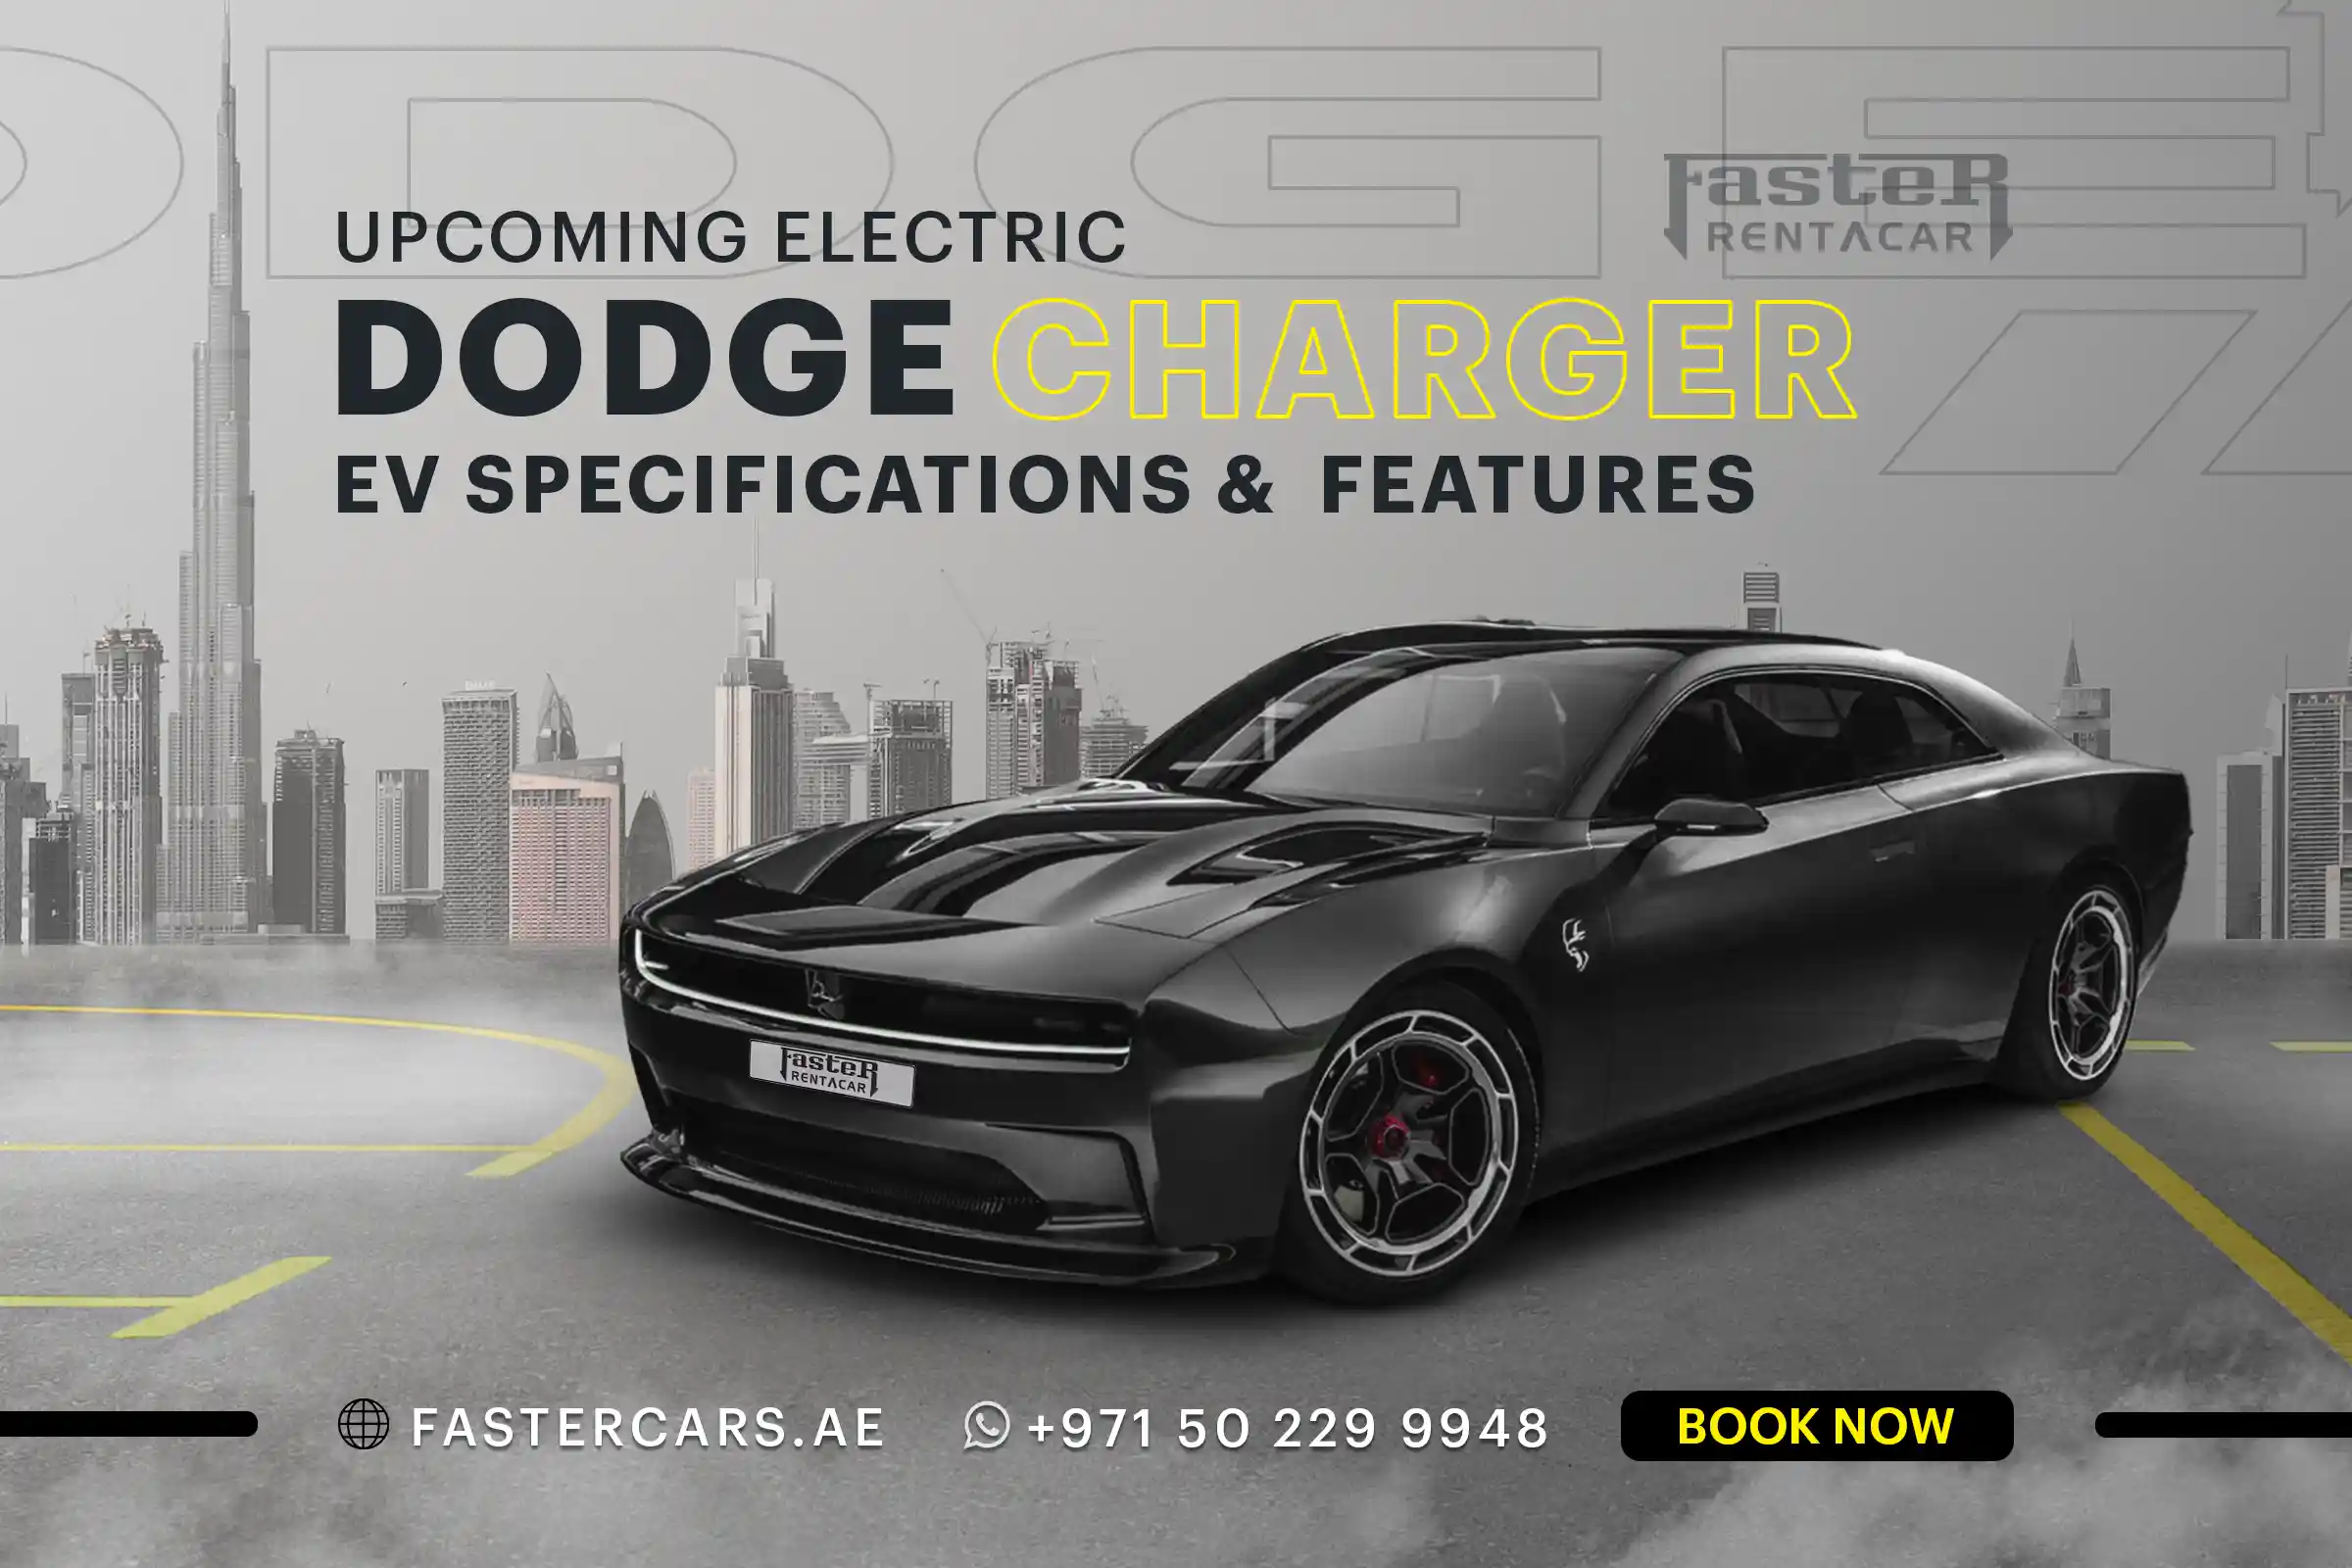 Upcoming Electric Dodge Charger EV - Everything You Need to Know